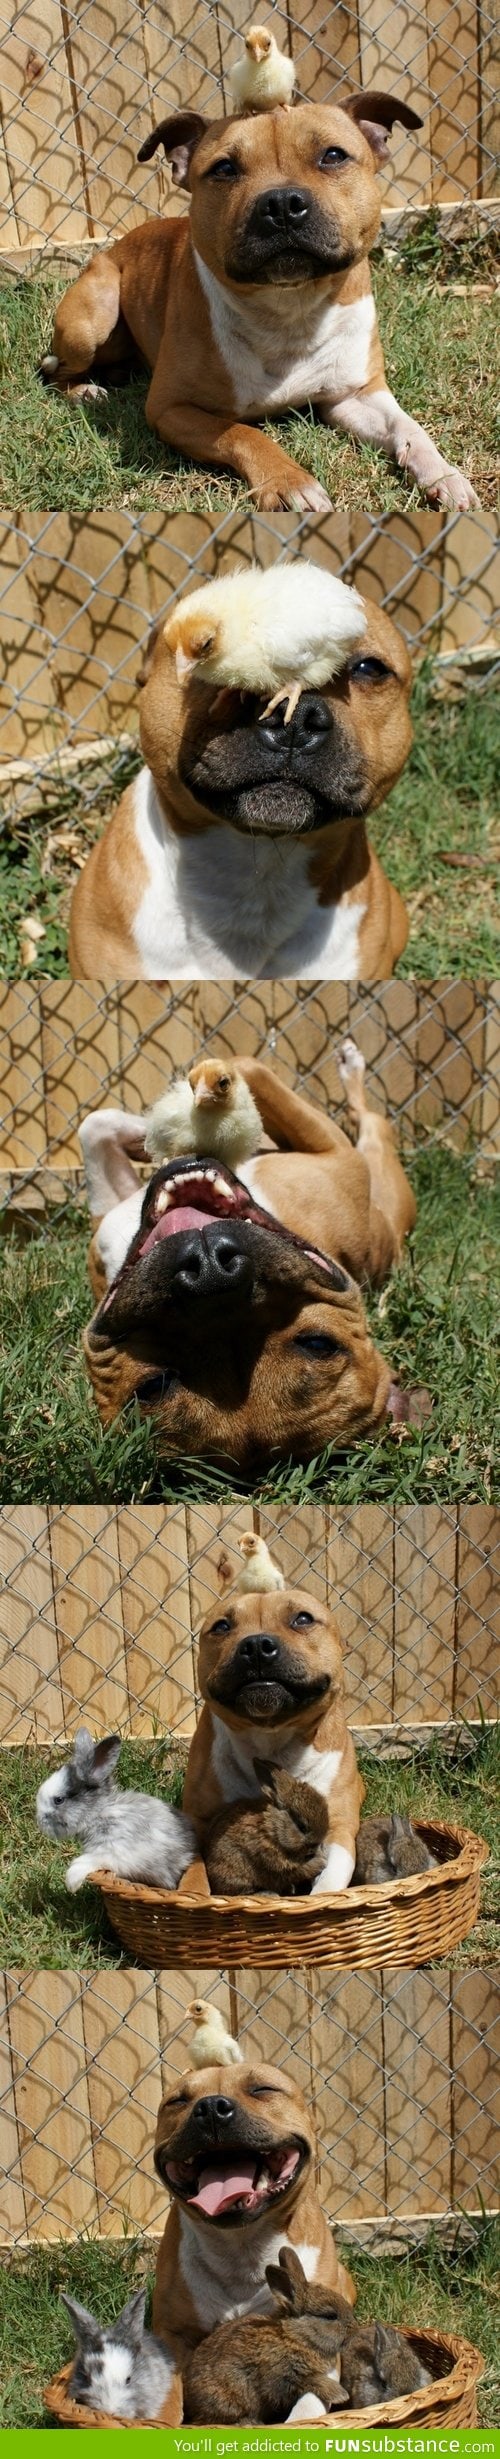 Just another vicious Pitbull